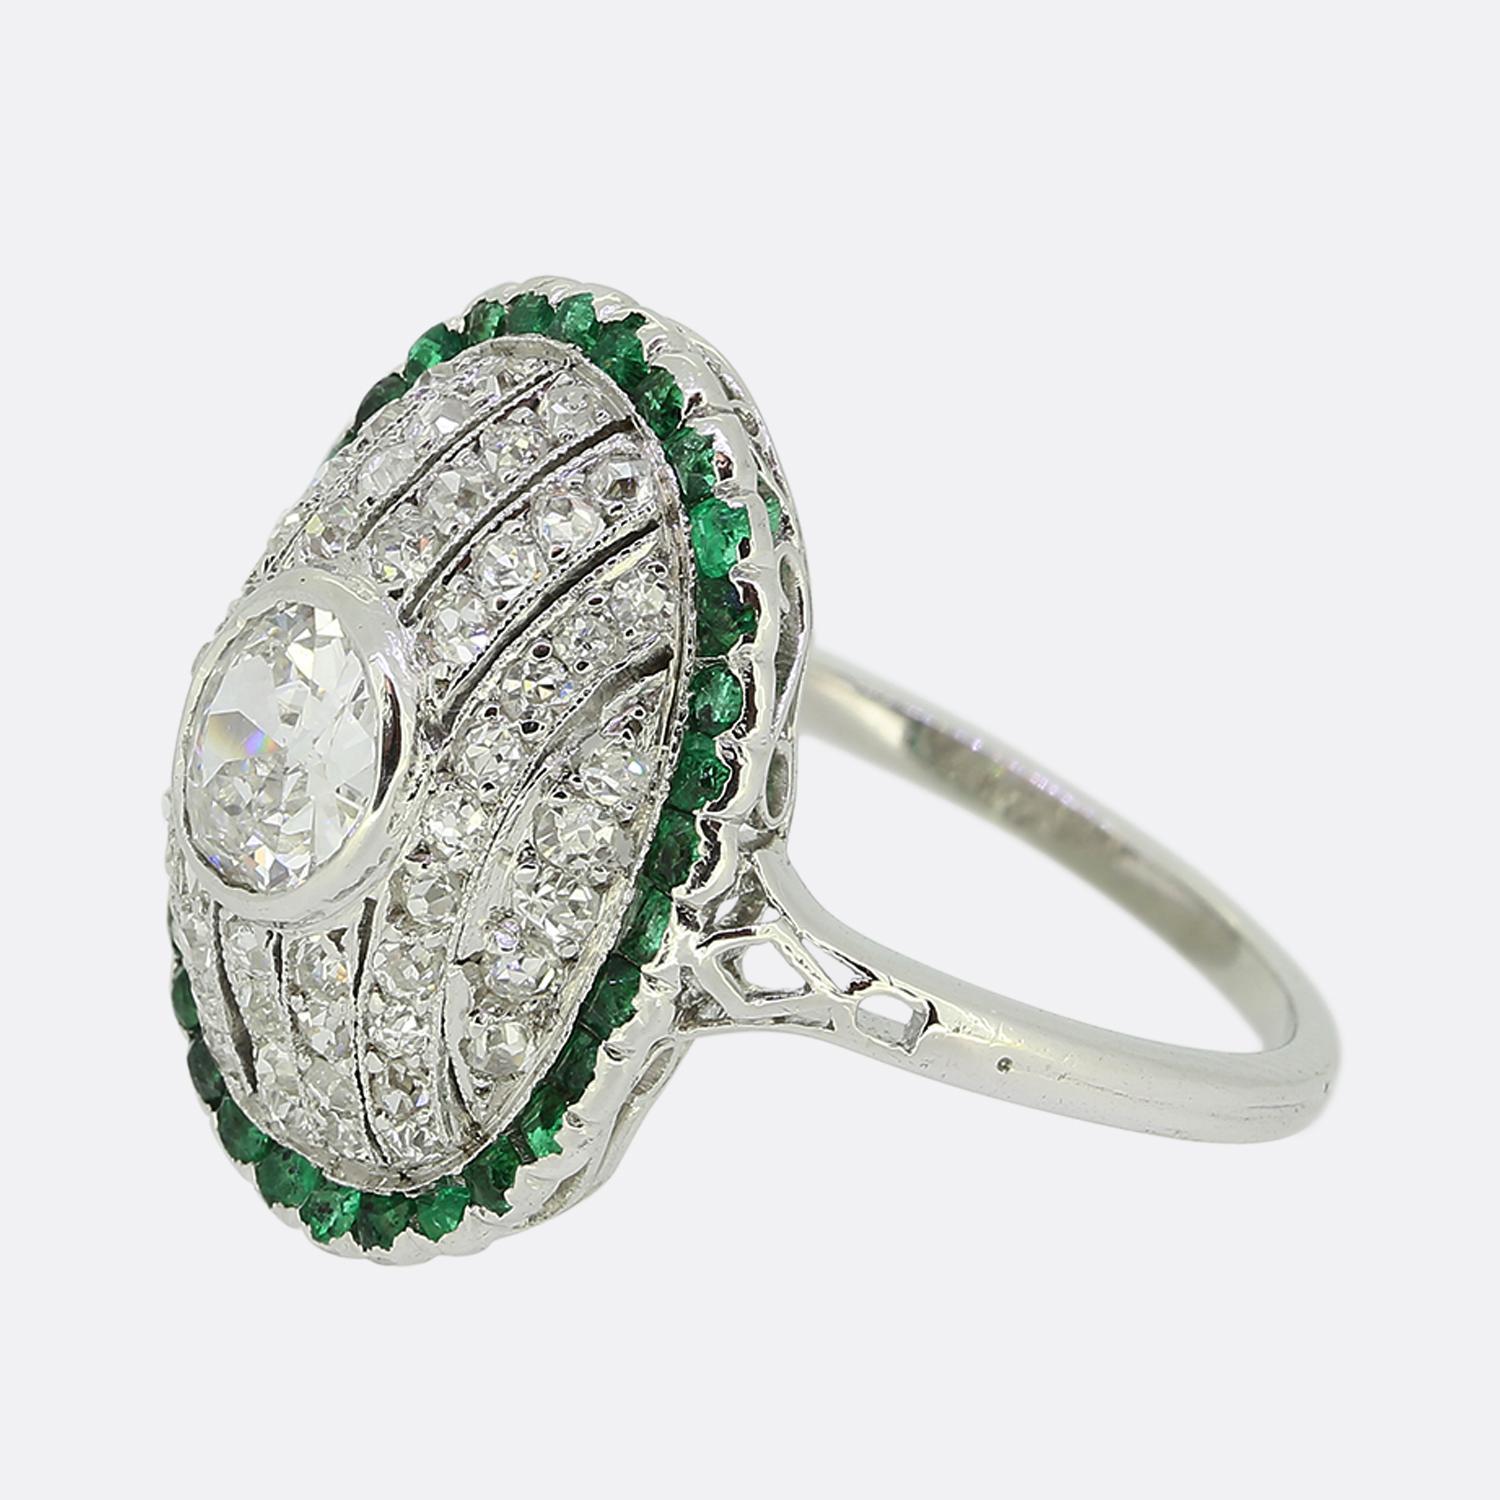 Here we have a fabulous emerald and diamond cluster ring crafted during pinnacle of the Art Deco movement. A single round faceted old European cut diamond sits slightly risen at the centre of the face in a full bezel setting. This principal stone